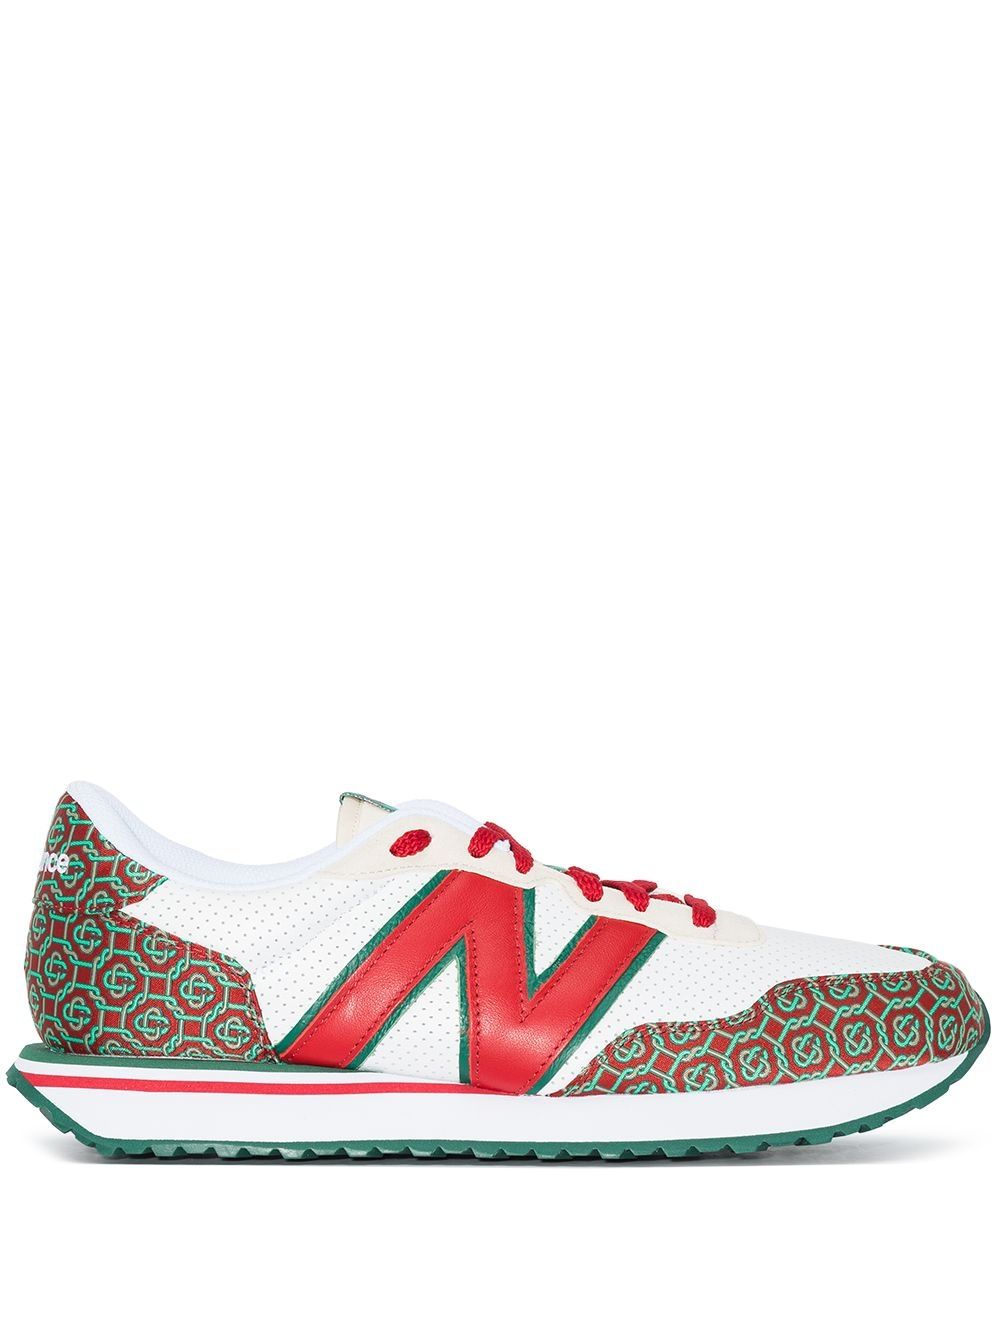 New Balance x Casablanca 237 low-top sneakers - White